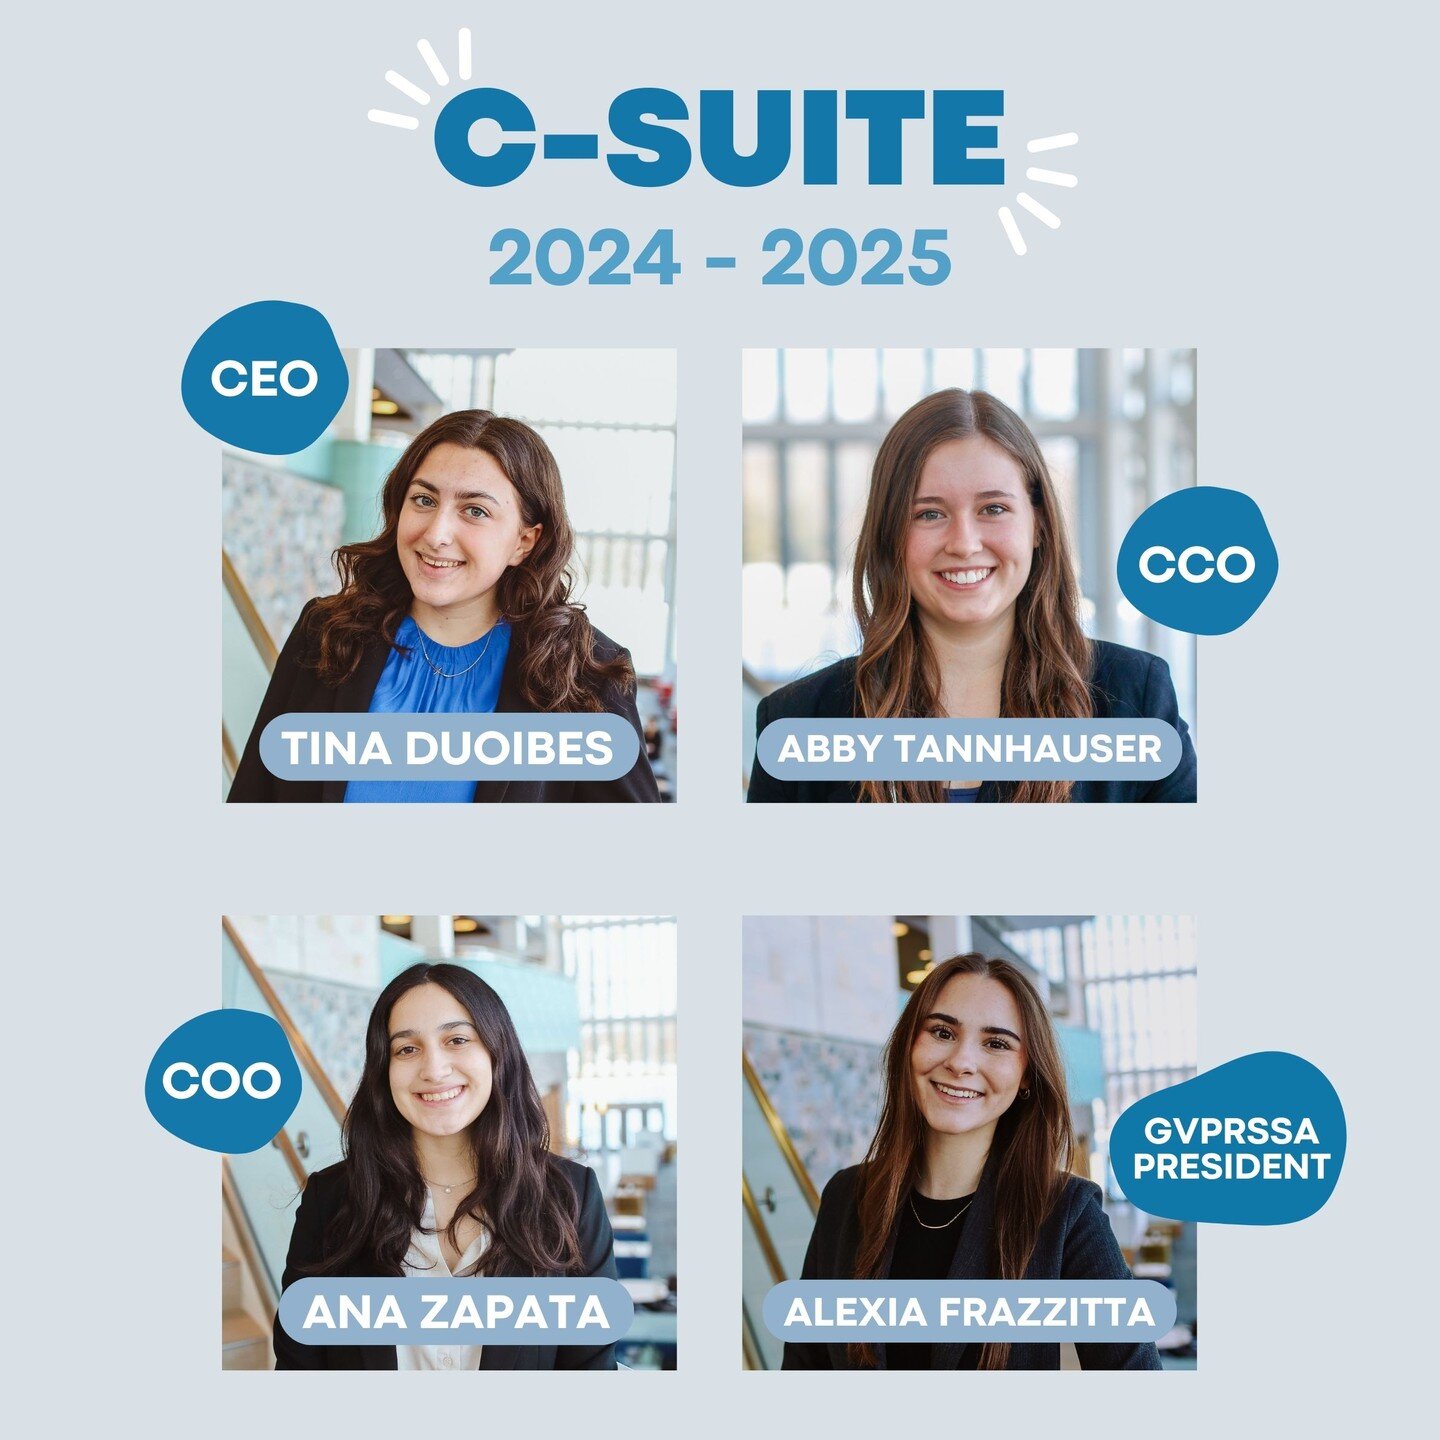 Introducing our 2024-2025 C-Suite! 💙 ⭐

Congratulations to these STARS who will be leading GrandPR for the next school year.

Chief Executive Officer- @tinaduoibes 
Chief Communications Officer- @abby.tannhauser
Chief Operations Officer- @anaa.olivi